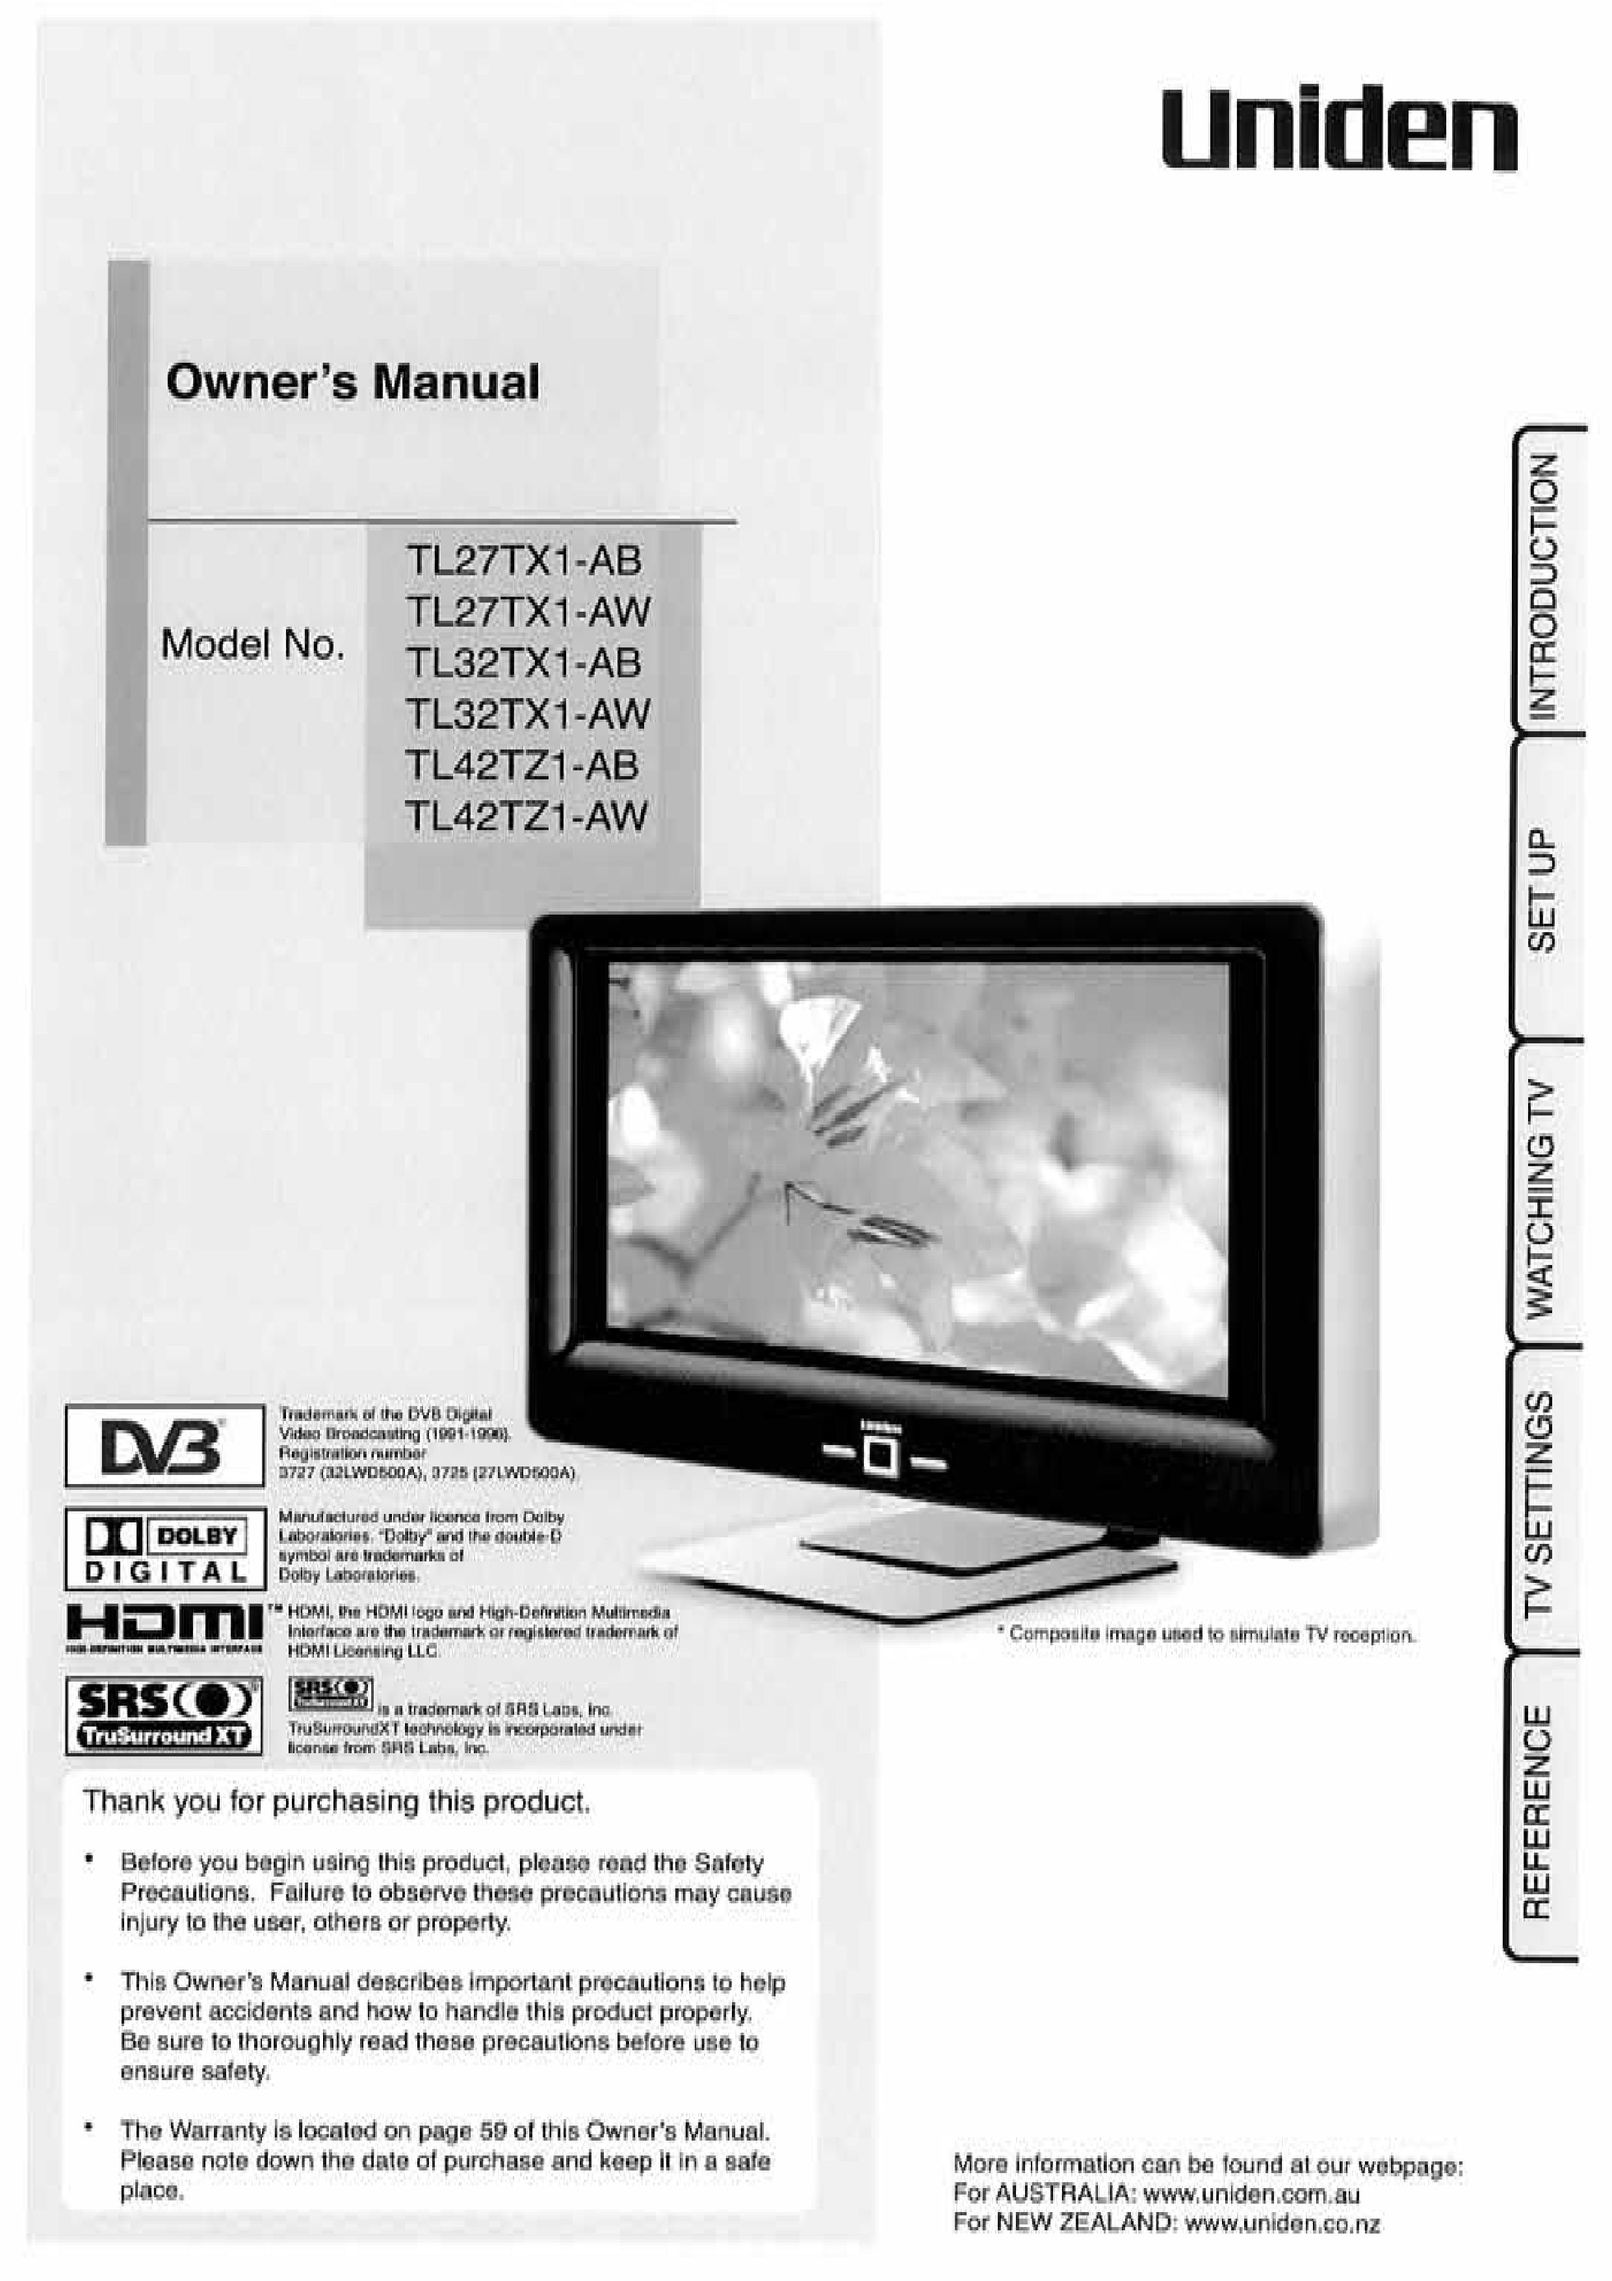 Uniden TL32TX1-AW Flat Panel Television User Manual